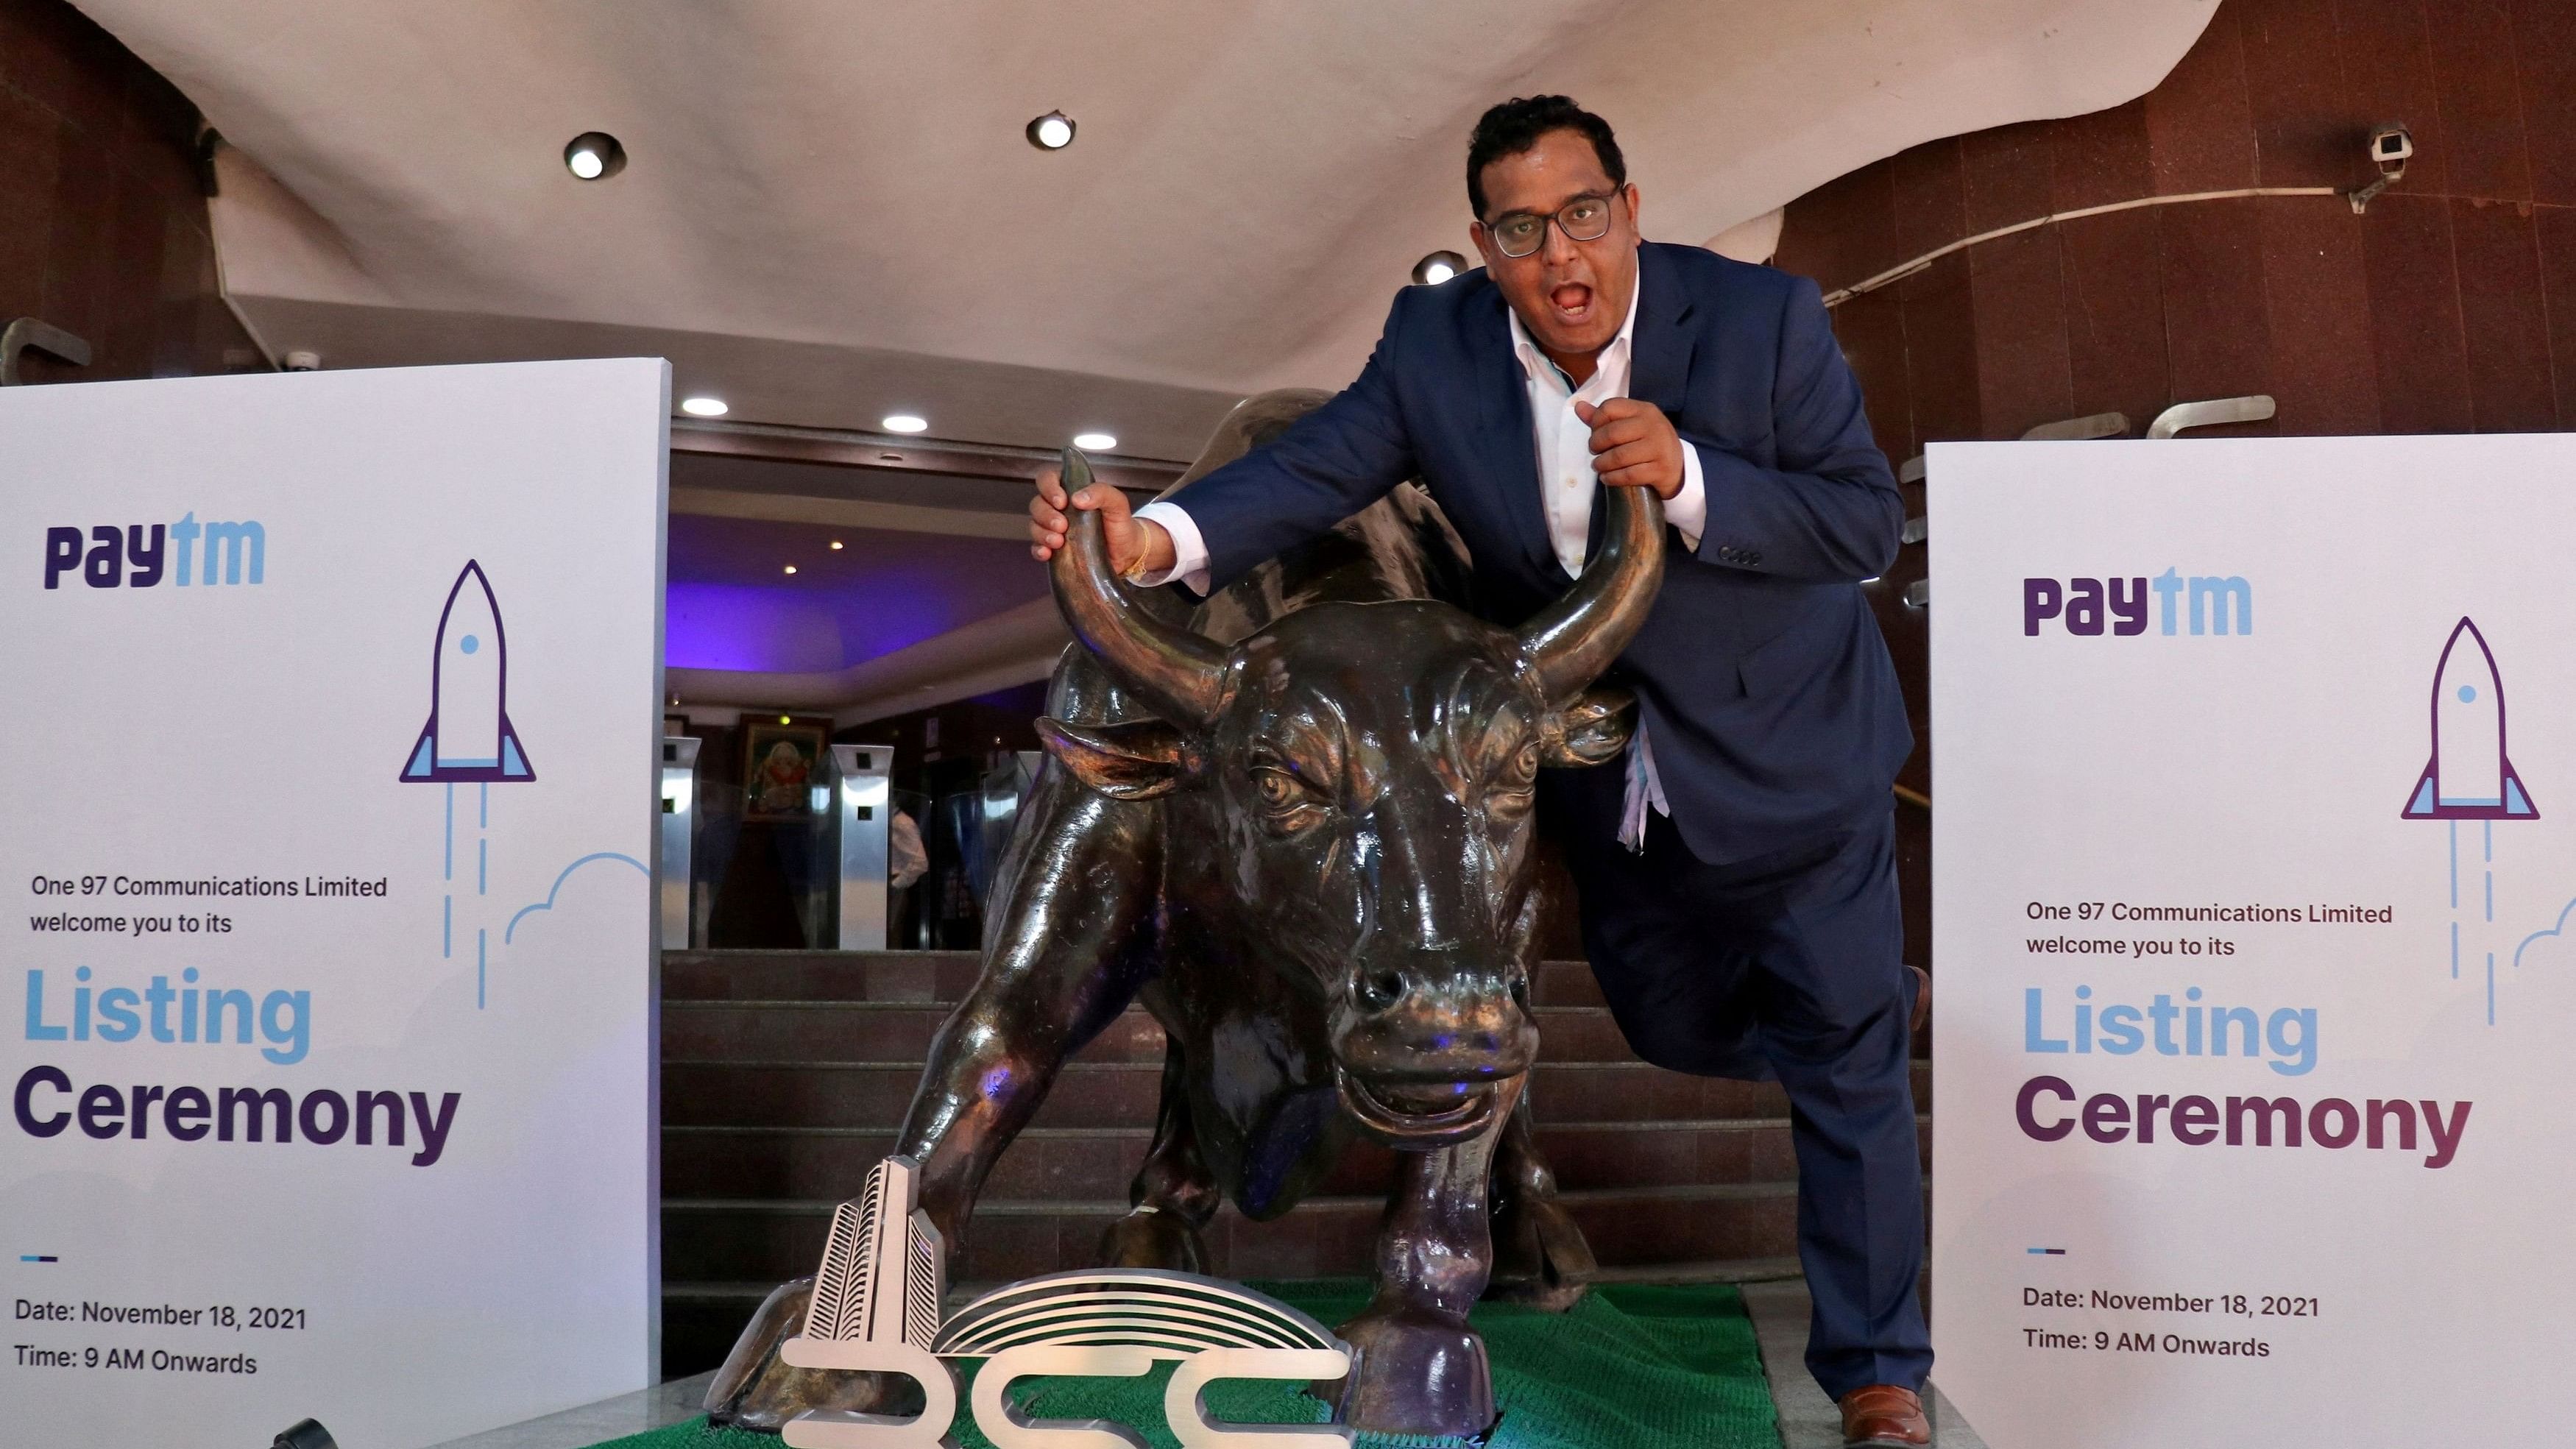 <div class="paragraphs"><p>FILE PHOTO: Paytm founder and CEO Vijay Shekhar Sharma poses with a bronze replica of a bull after the company's IPO listing ceremony at the Bombay Stock Exchange  in Mumbai, India, November 18, 2021. </p></div>